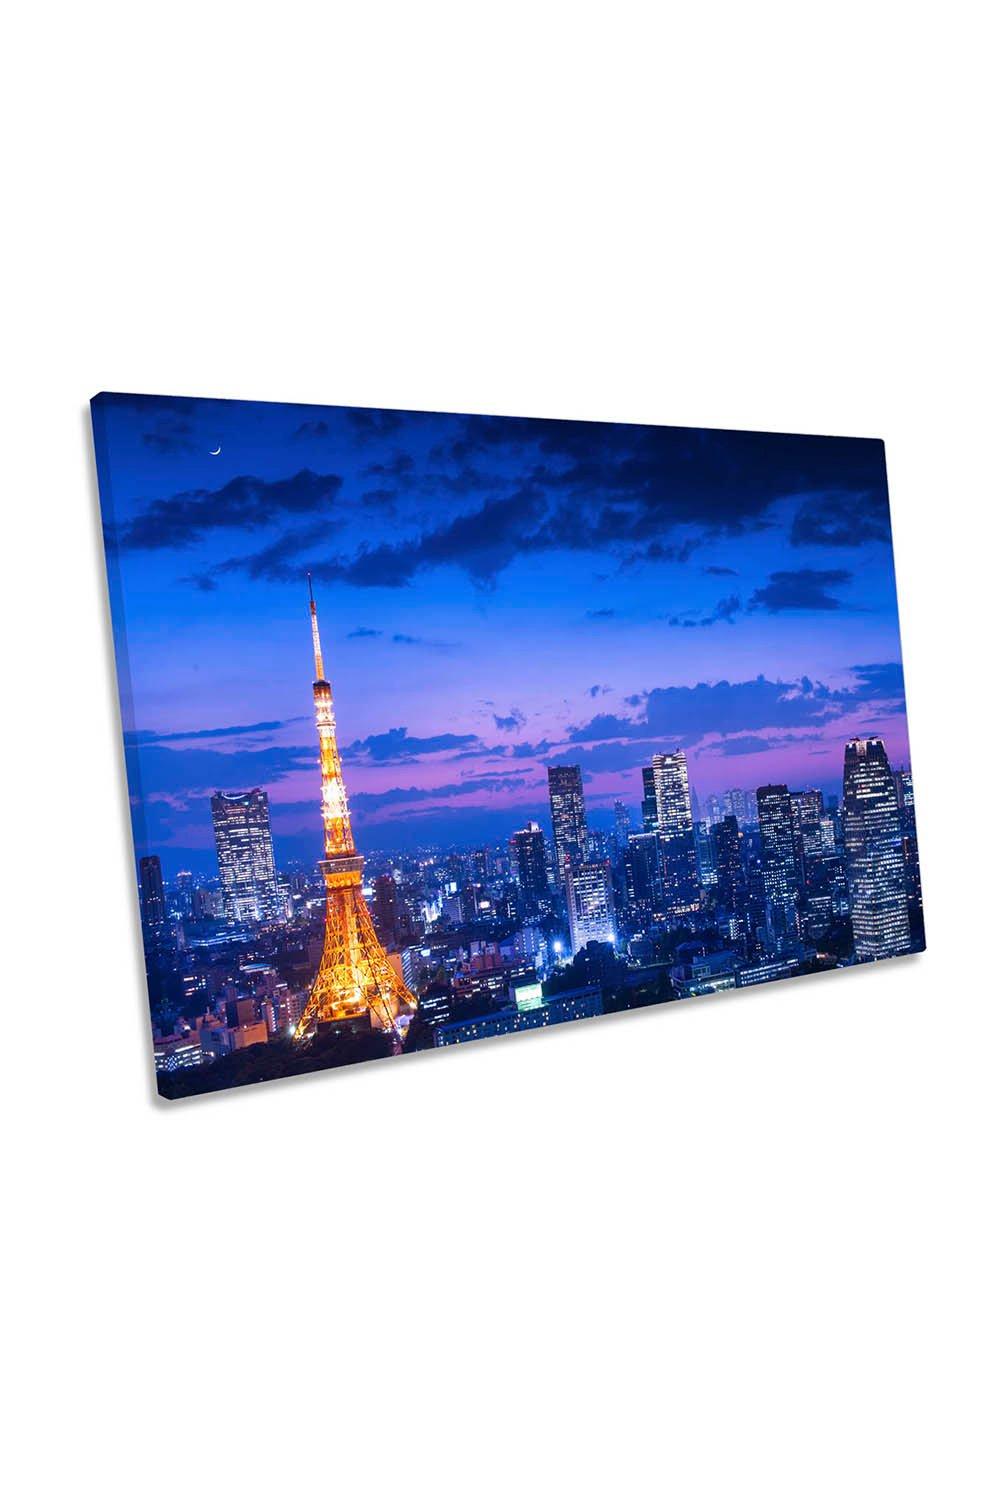 Tokyo Night View Asia City Skyline Blue Canvas Wall Art Picture Print